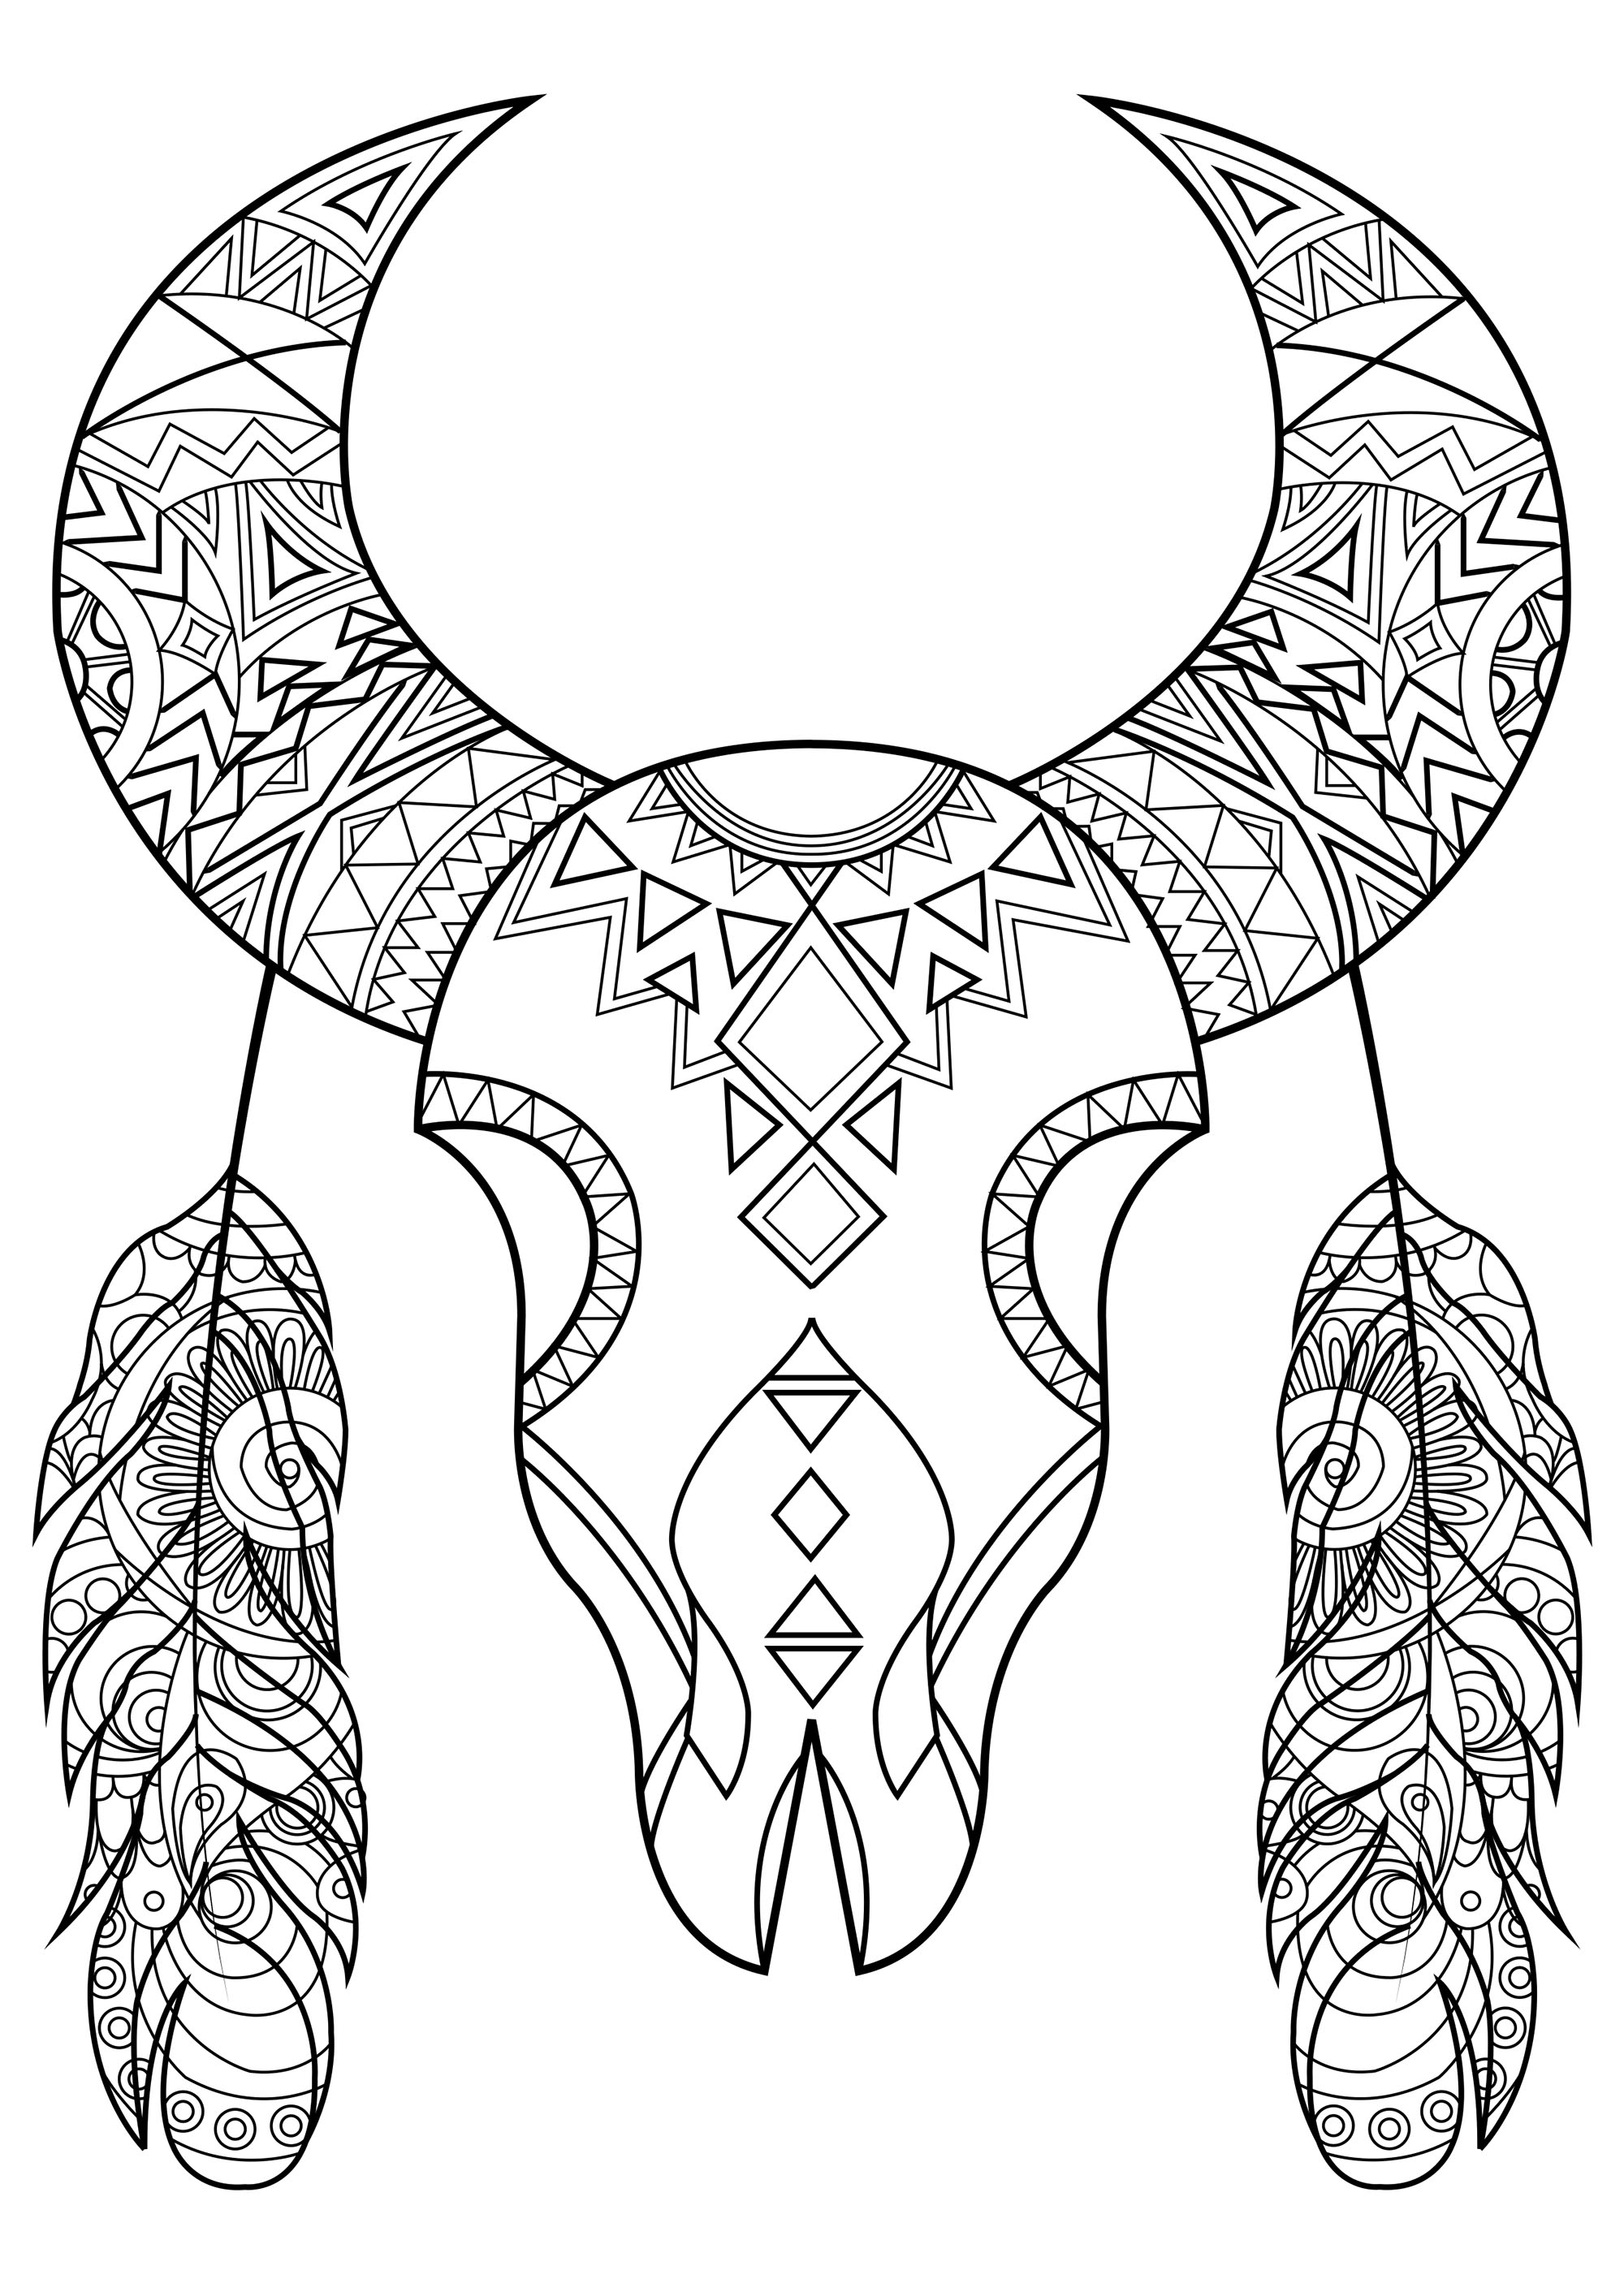 Bull Skull - Native American Adult Coloring Pages